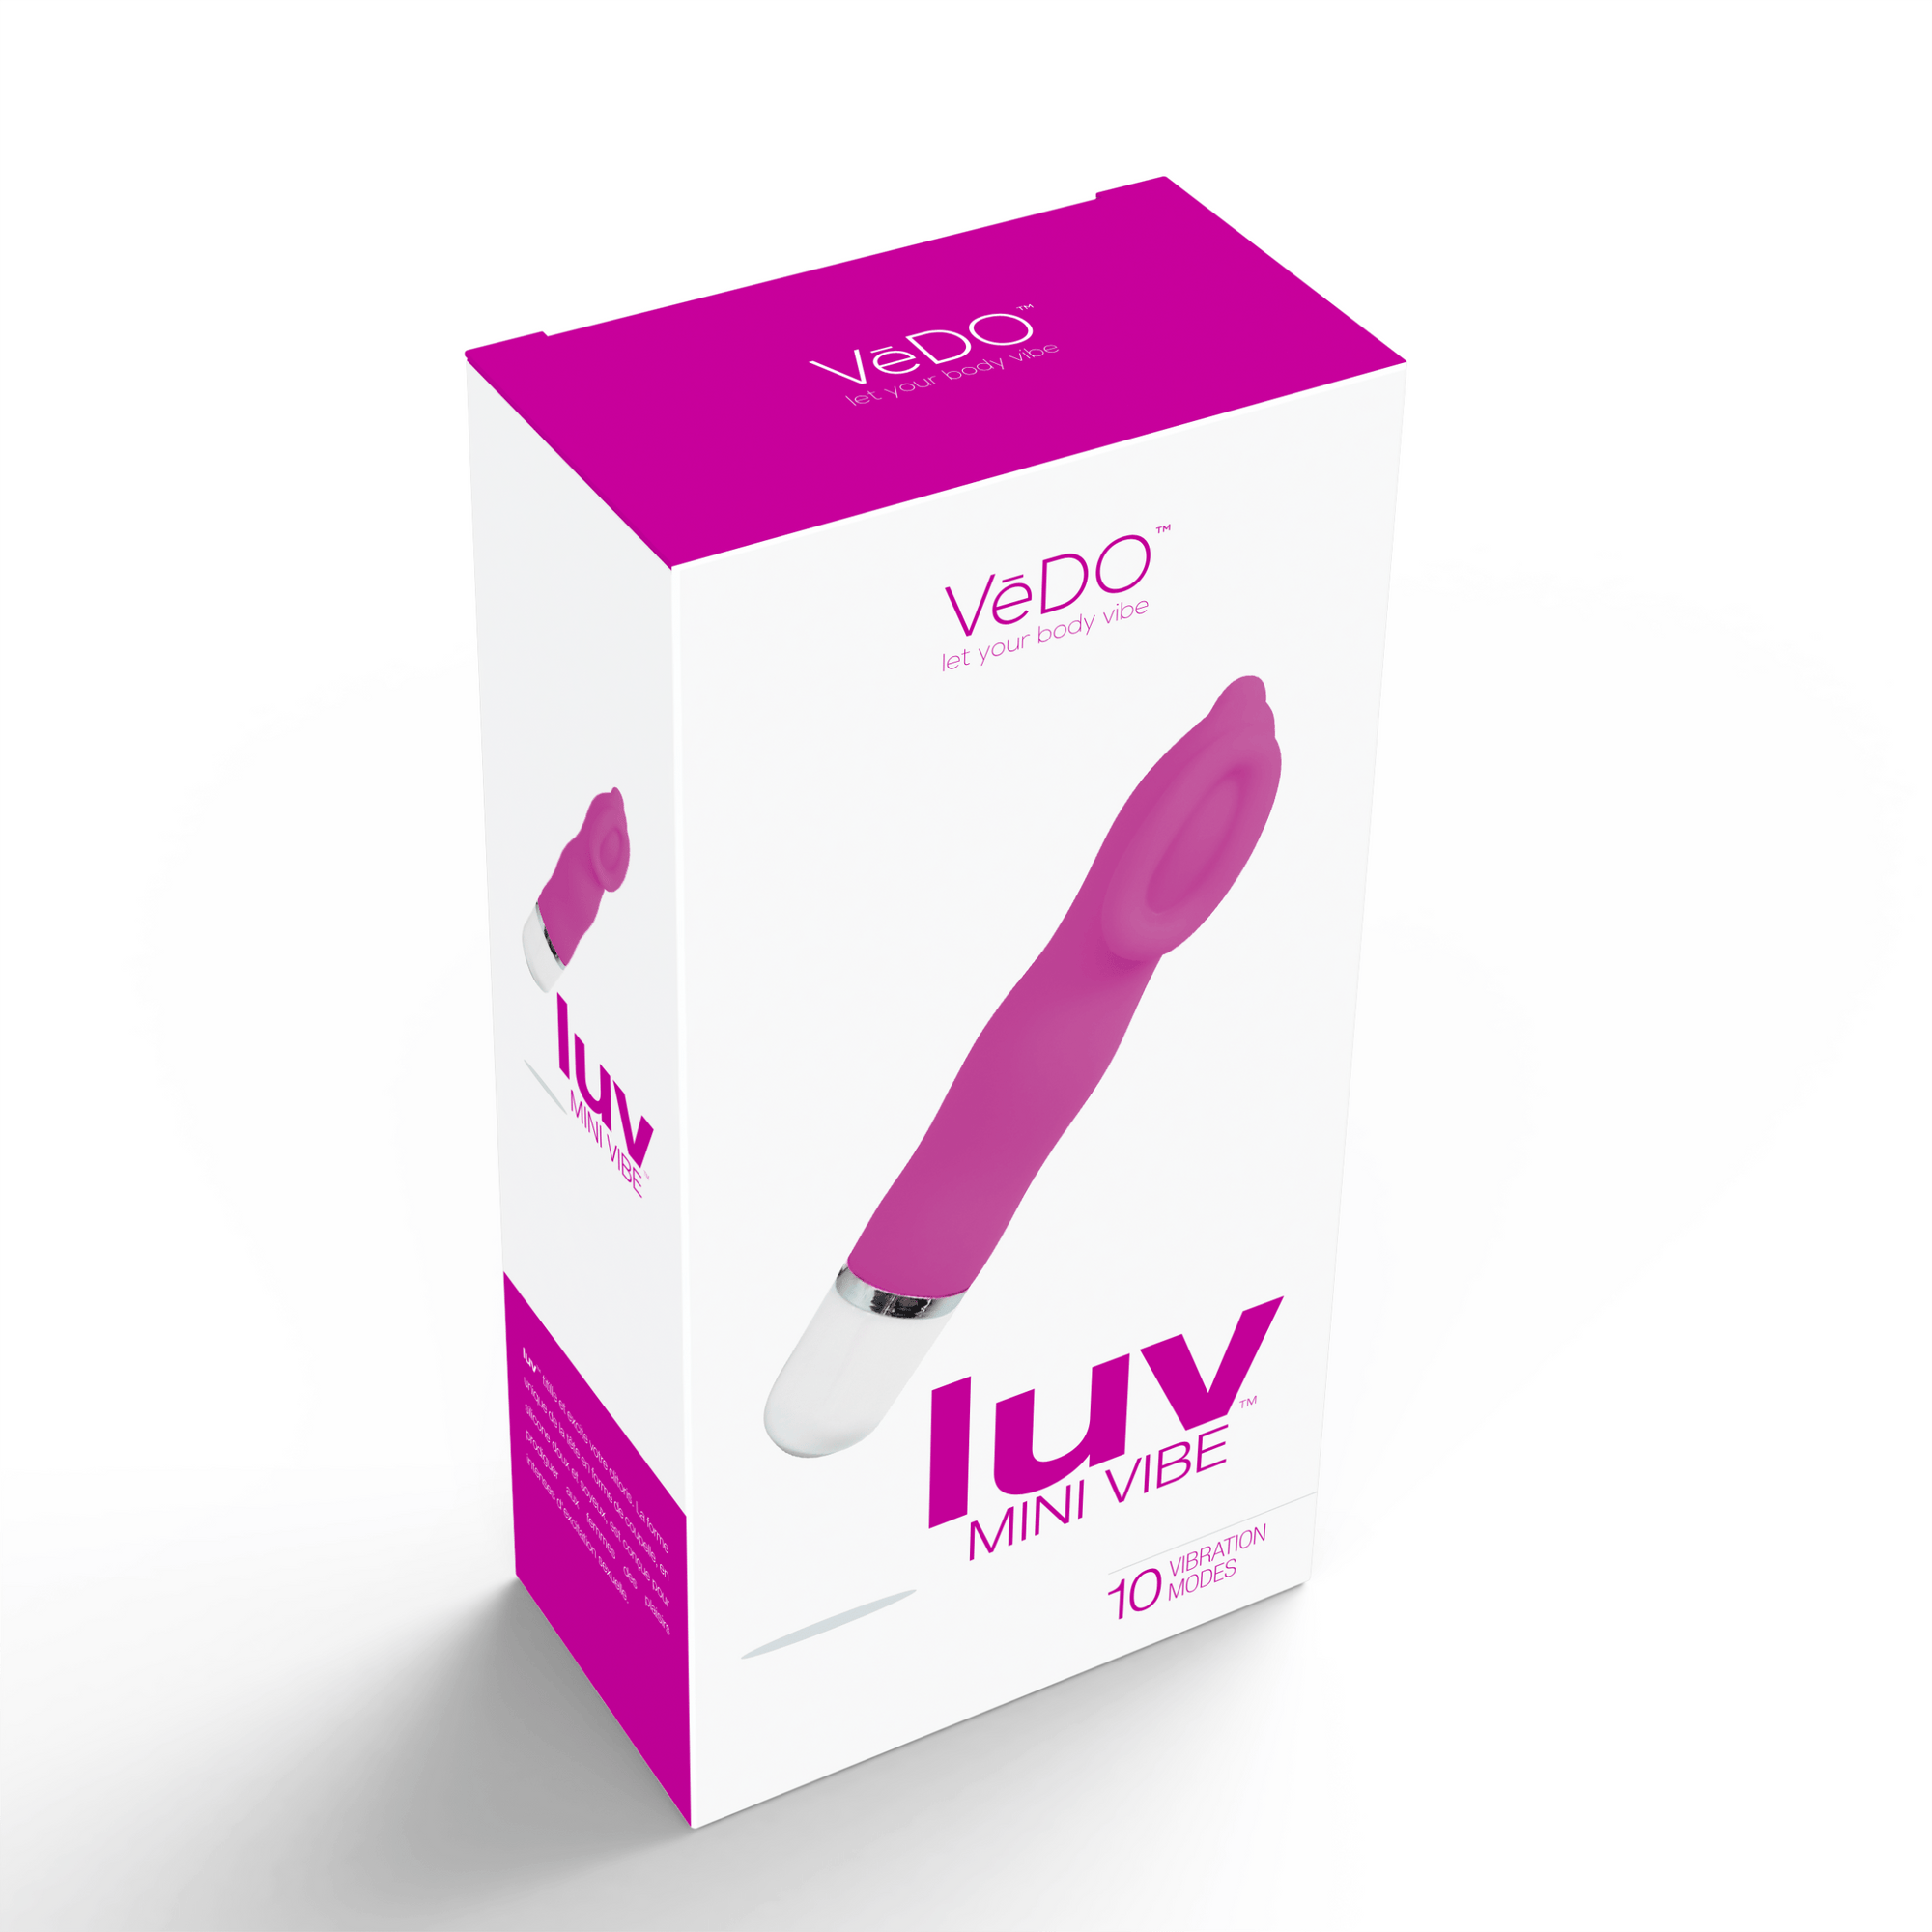 luv mini vibe hot in bed pink